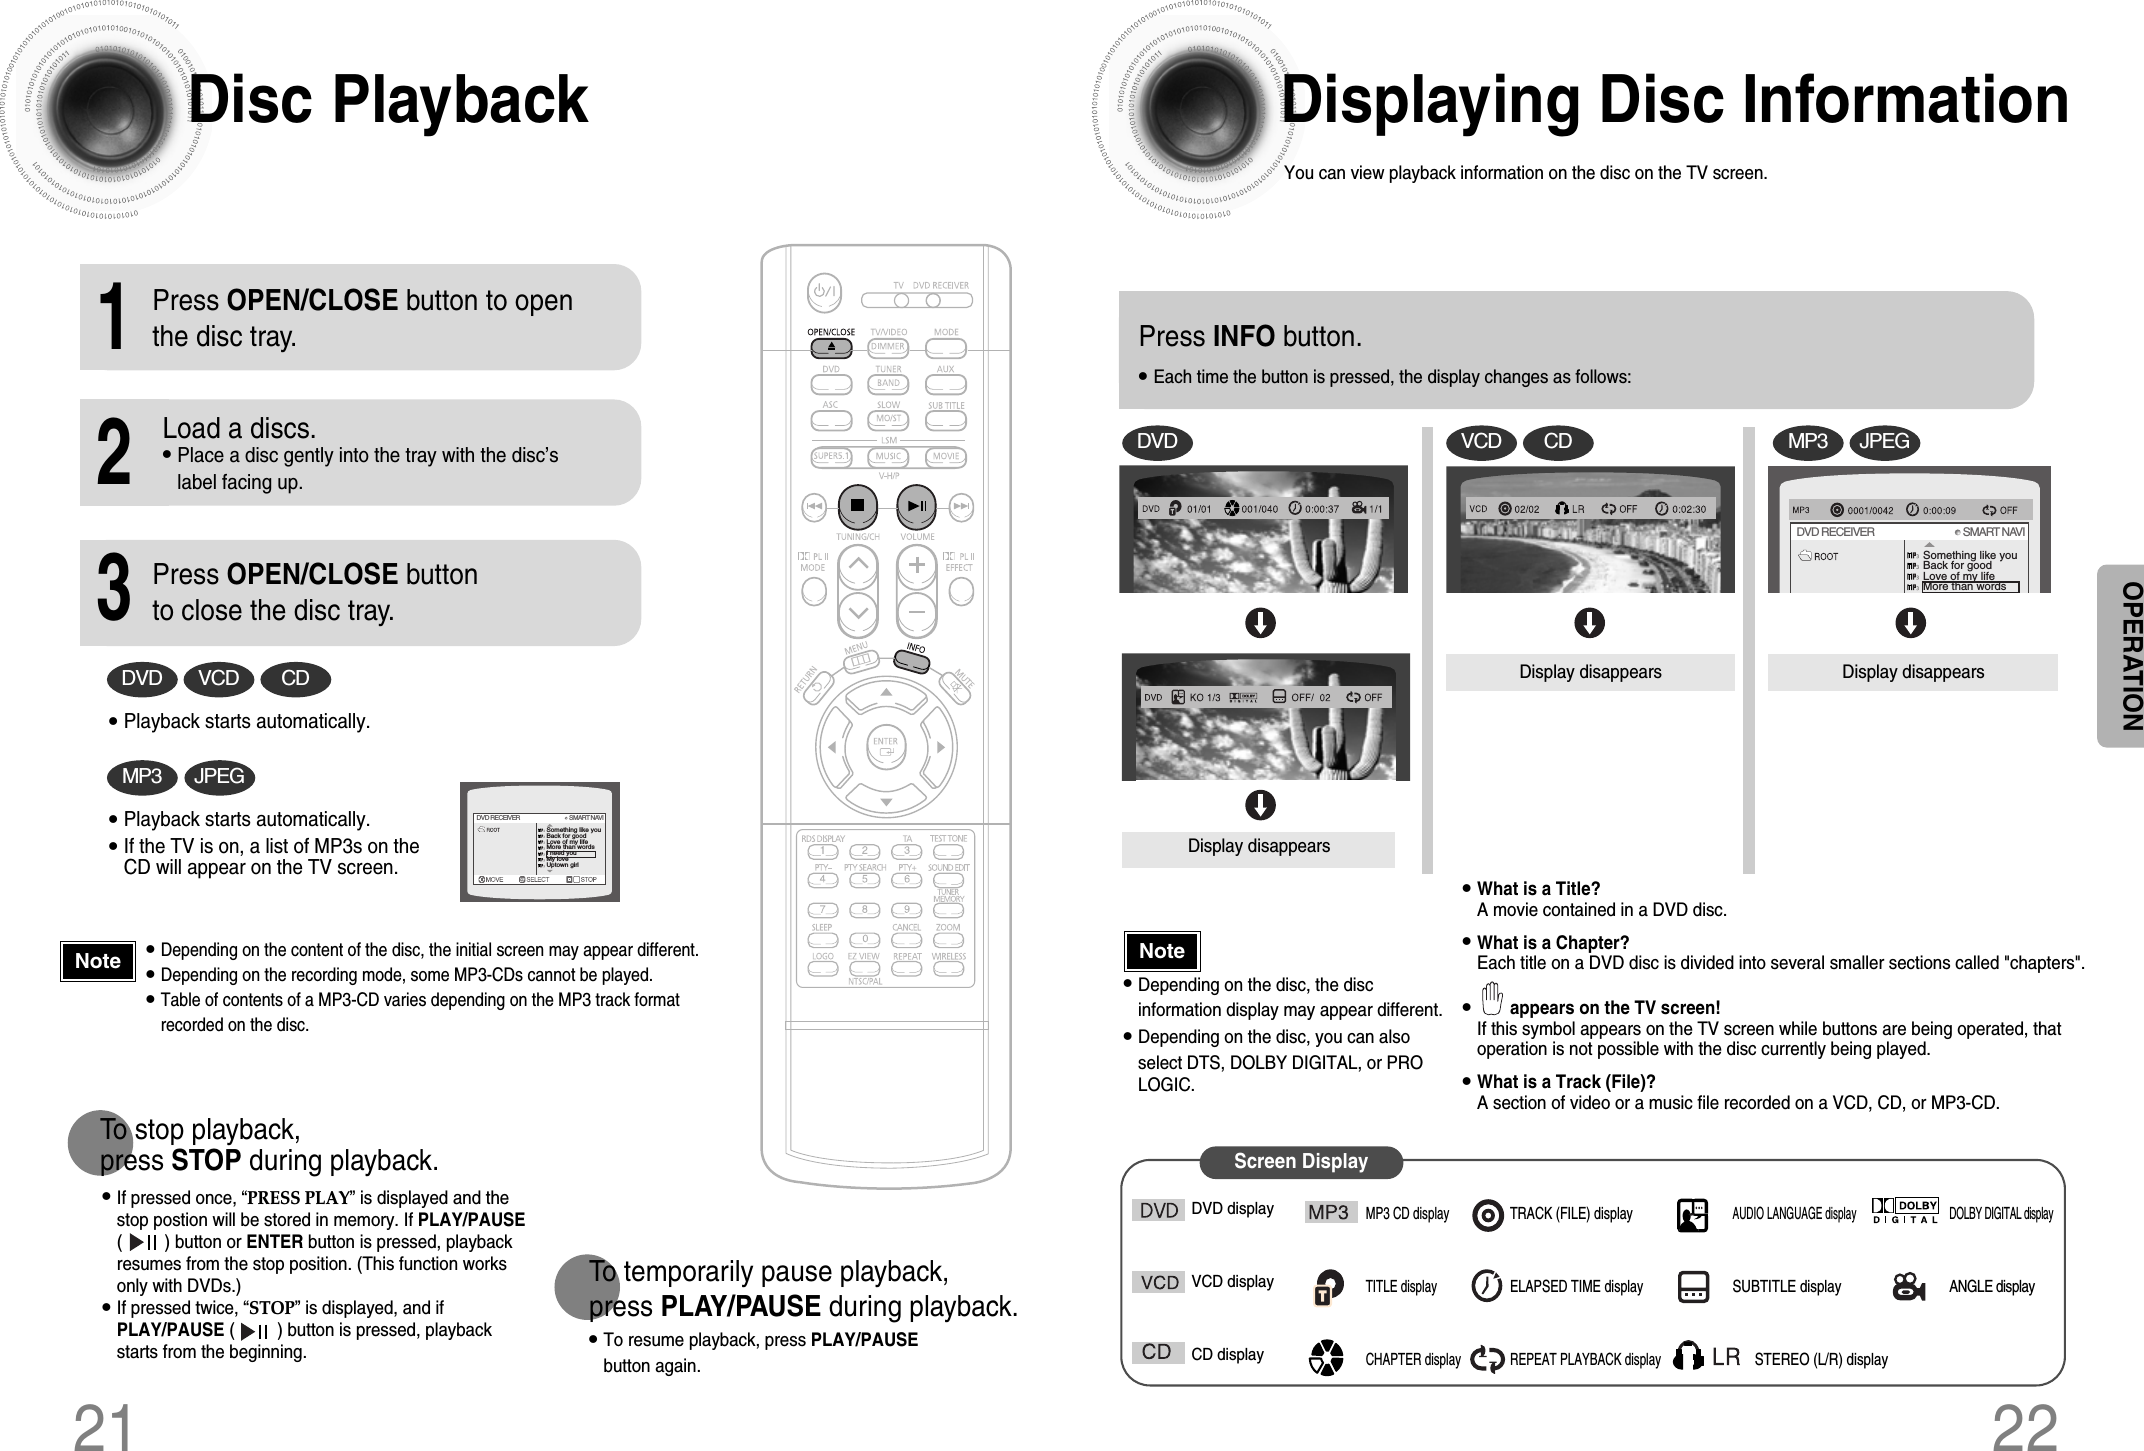 Displaying Disc InformationYou can view playback information on the disc on the TV screen.22Press INFO button.•Each time the button is pressed, the display changes as follows:DVDDisplay disappearsDisplay disappears Display disappearsVCD CDSomething like youBack for goodLove of my lifeMore than wordsDVD RECEIVER                                     SMART NAVIMP3 JPEG•What is a Title? A movie contained in a DVD disc.•What is a Chapter? Each title on a DVD disc is divided into several smaller sections called &quot;chapters&quot;.•appears on the TV screen! If this symbol appears on the TV screen while buttons are being operated, thatoperation is not possible with the disc currently being played.•What is a Track (File)?A section of video or a music file recorded on a VCD, CD, or MP3-CD.Screen DisplayDVD displayVCD displayCD displayMP3 CD displayTITLE displayCHAPTER displayTRACK (FILE) displayELAPSED TIME displayREPEAT PLAYBACK displayAUDIO LANGUAGE displaySUBTITLE displaySTEREO (L/R) displayDOLBY DIGITAL displayANGLE display•Depending on the disc, the discinformation display may appear different.•Depending on the disc, you can alsoselect DTS, DOLBY DIGITAL, or PROLOGIC.21NoteOPERATIONDisc Playback•Depending on the content of the disc, the initial screen may appear different.•Depending on the recording mode, some MP3-CDs cannot be played.•Table of contents of a MP3-CD varies depending on the MP3 track formatrecorded on the disc.•To resume playback, press PLAY/PAUSEbutton again.1Press OPEN/CLOSE button to openthe disc tray.2Load a discs.•Place a disc gently into the tray with the disc’slabel facing up.3Press OPEN/CLOSE buttonto close the disc tray.To temporarily pause playback, press PLAY/PAUSE during playback.DVD VCD CD•Playback starts automatically.MP3 JPEG•Playback starts automatically.•If the TV is on, a list of MP3s on theCD will appear on the TV screen.Something like youBack for goodLove of my lifeMore than wordsI need youMy loveUptown girlDVD RECEIVER                                     SMART NAVI•If pressed once, “PRESS PLAY” is displayed and thestop postion will be stored in memory. If PLAY/PAUSE(         ) button or ENTER button is pressed, playbackresumes from the stop position. (This function worksonly with DVDs.)•If pressed twice, “STOP” is displayed, and ifPLAY/PAUSE (         ) button is pressed, playbackstarts from the beginning.To stop playback, press STOP during playback.Note